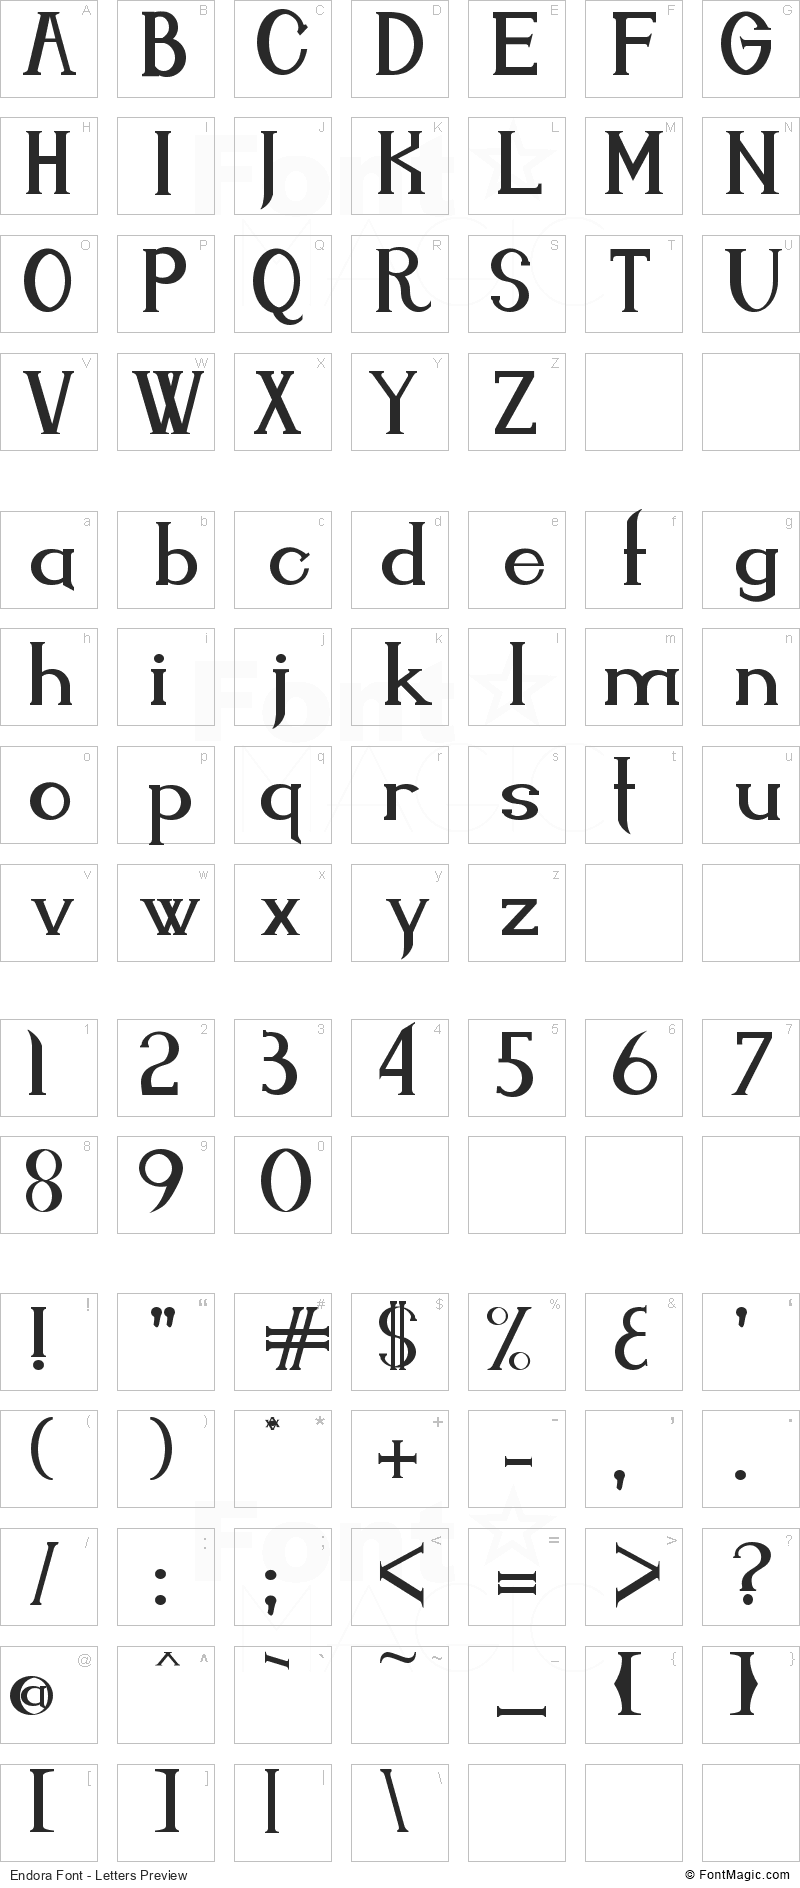 Endora Font - All Latters Preview Chart